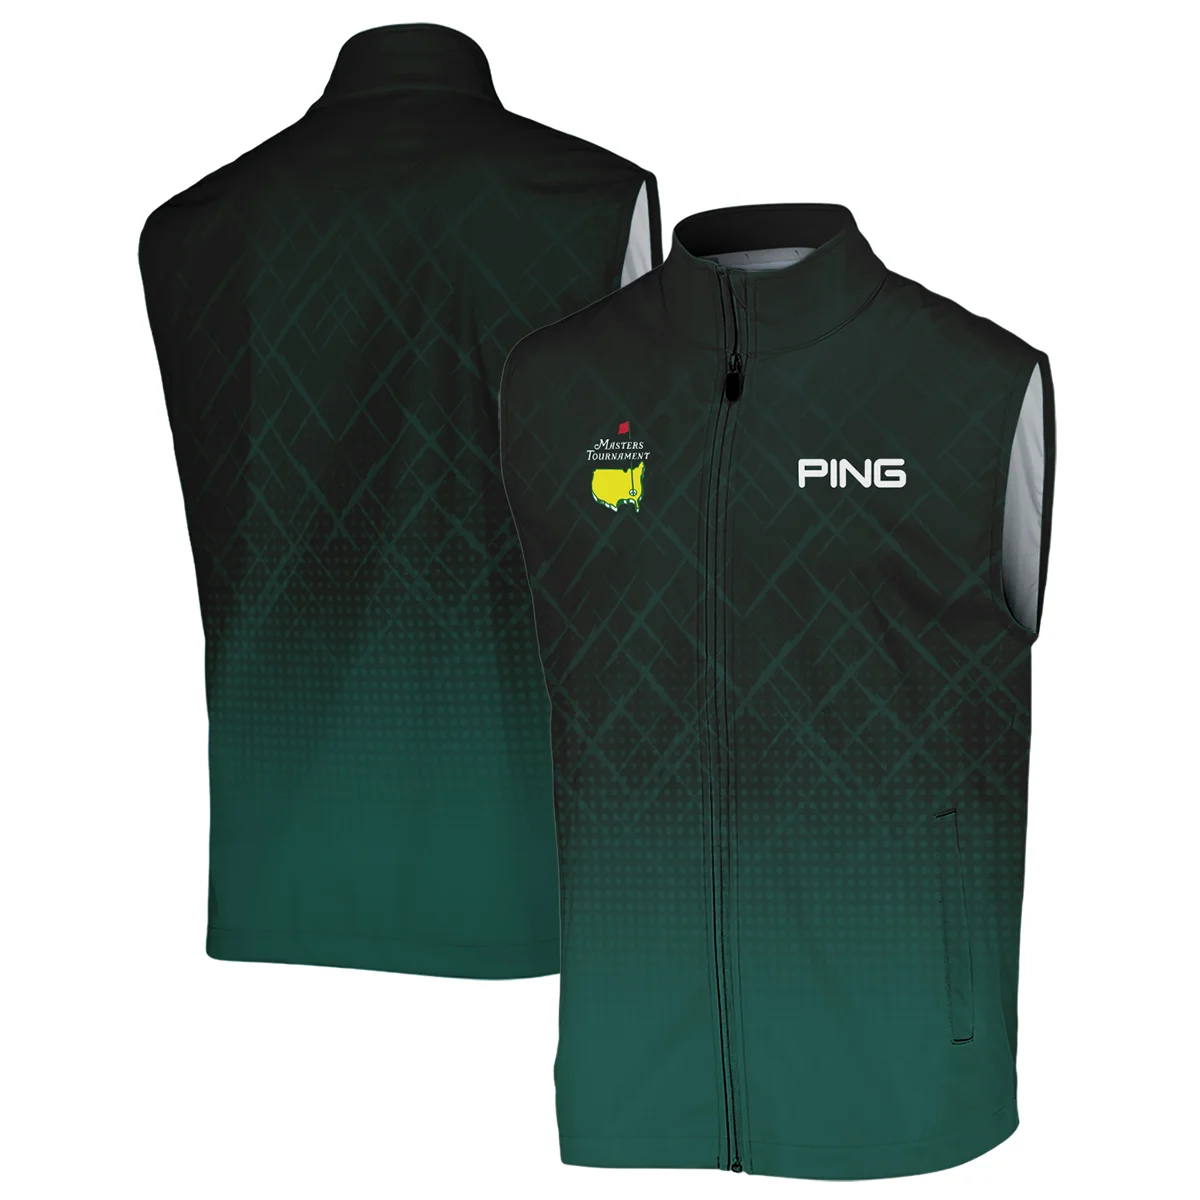 Ping Masters Tournament Sport Jersey Pattern Dark Green Vneck Long Polo Shirt Style Classic Long Polo Shirt For Men